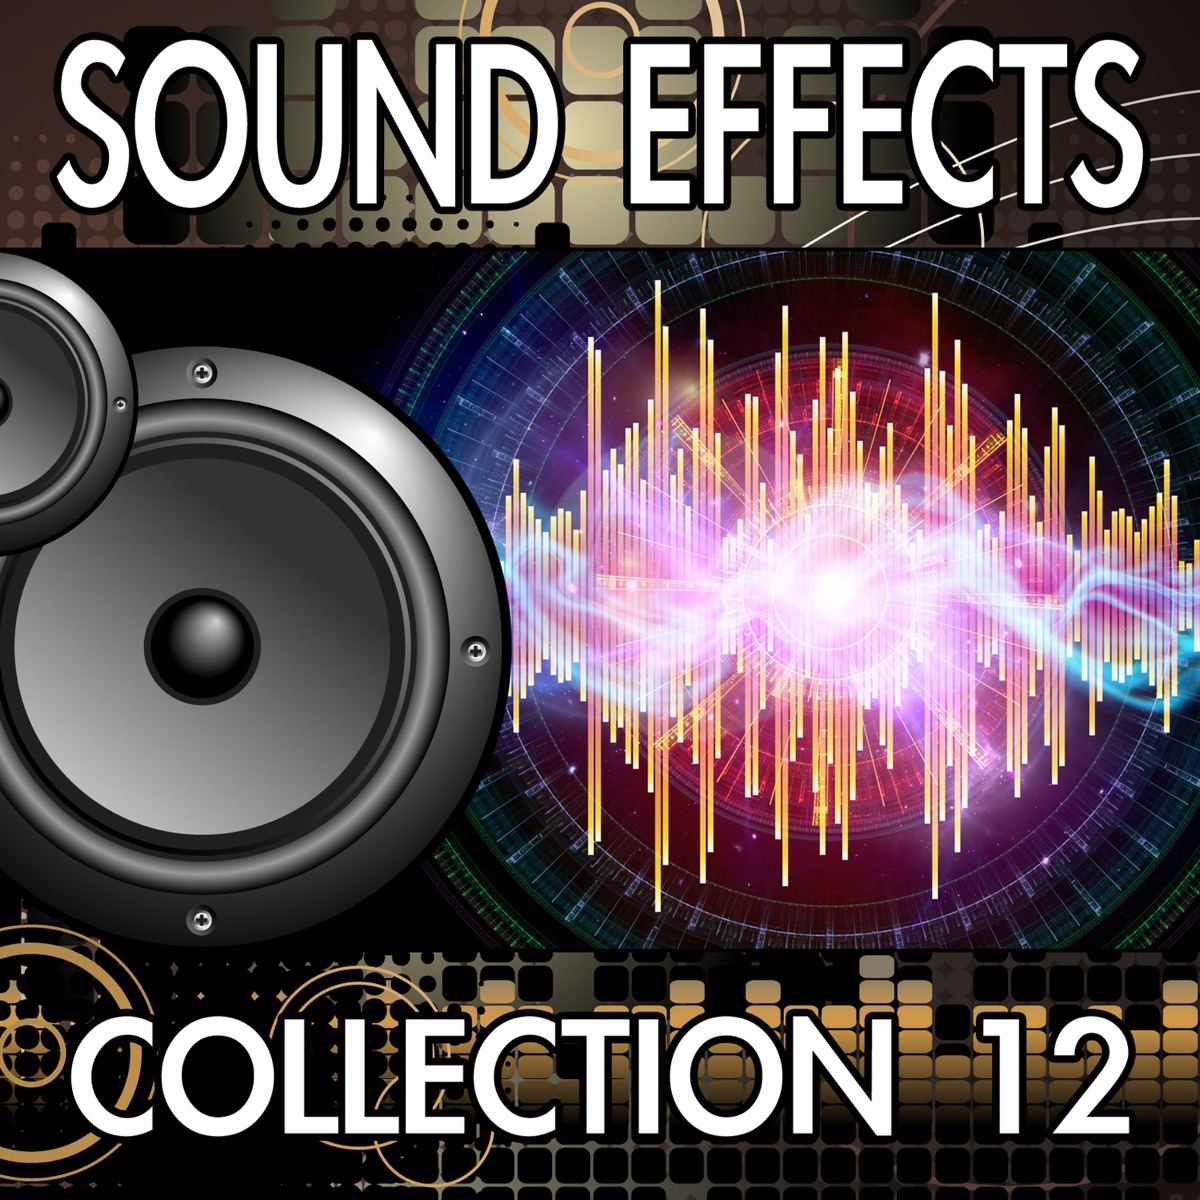 Beep Sound Effects by Finnolia Sound Effects on Apple Music